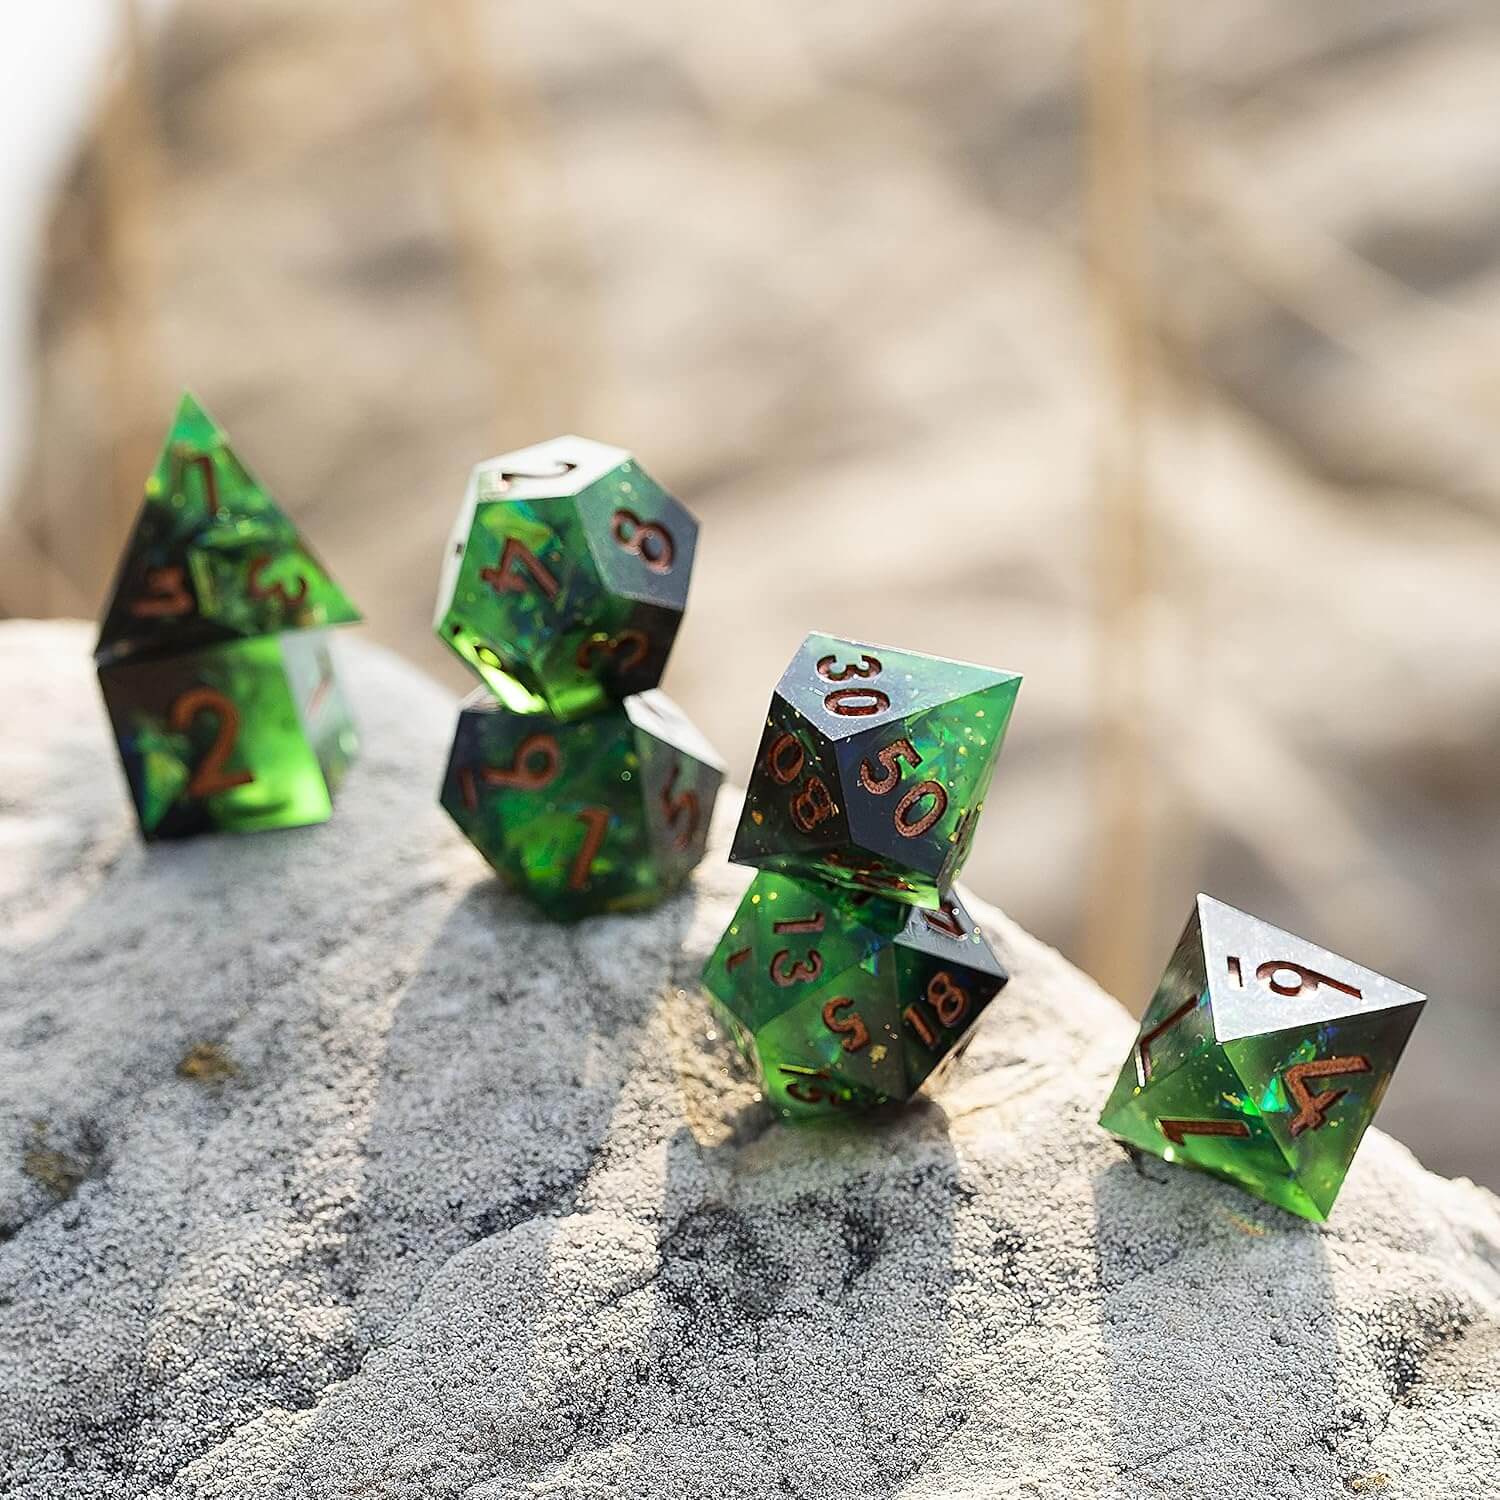 Rpg Unusual Polyhedral Sharp Edge Resin Dice Sets D&D - Word of Death